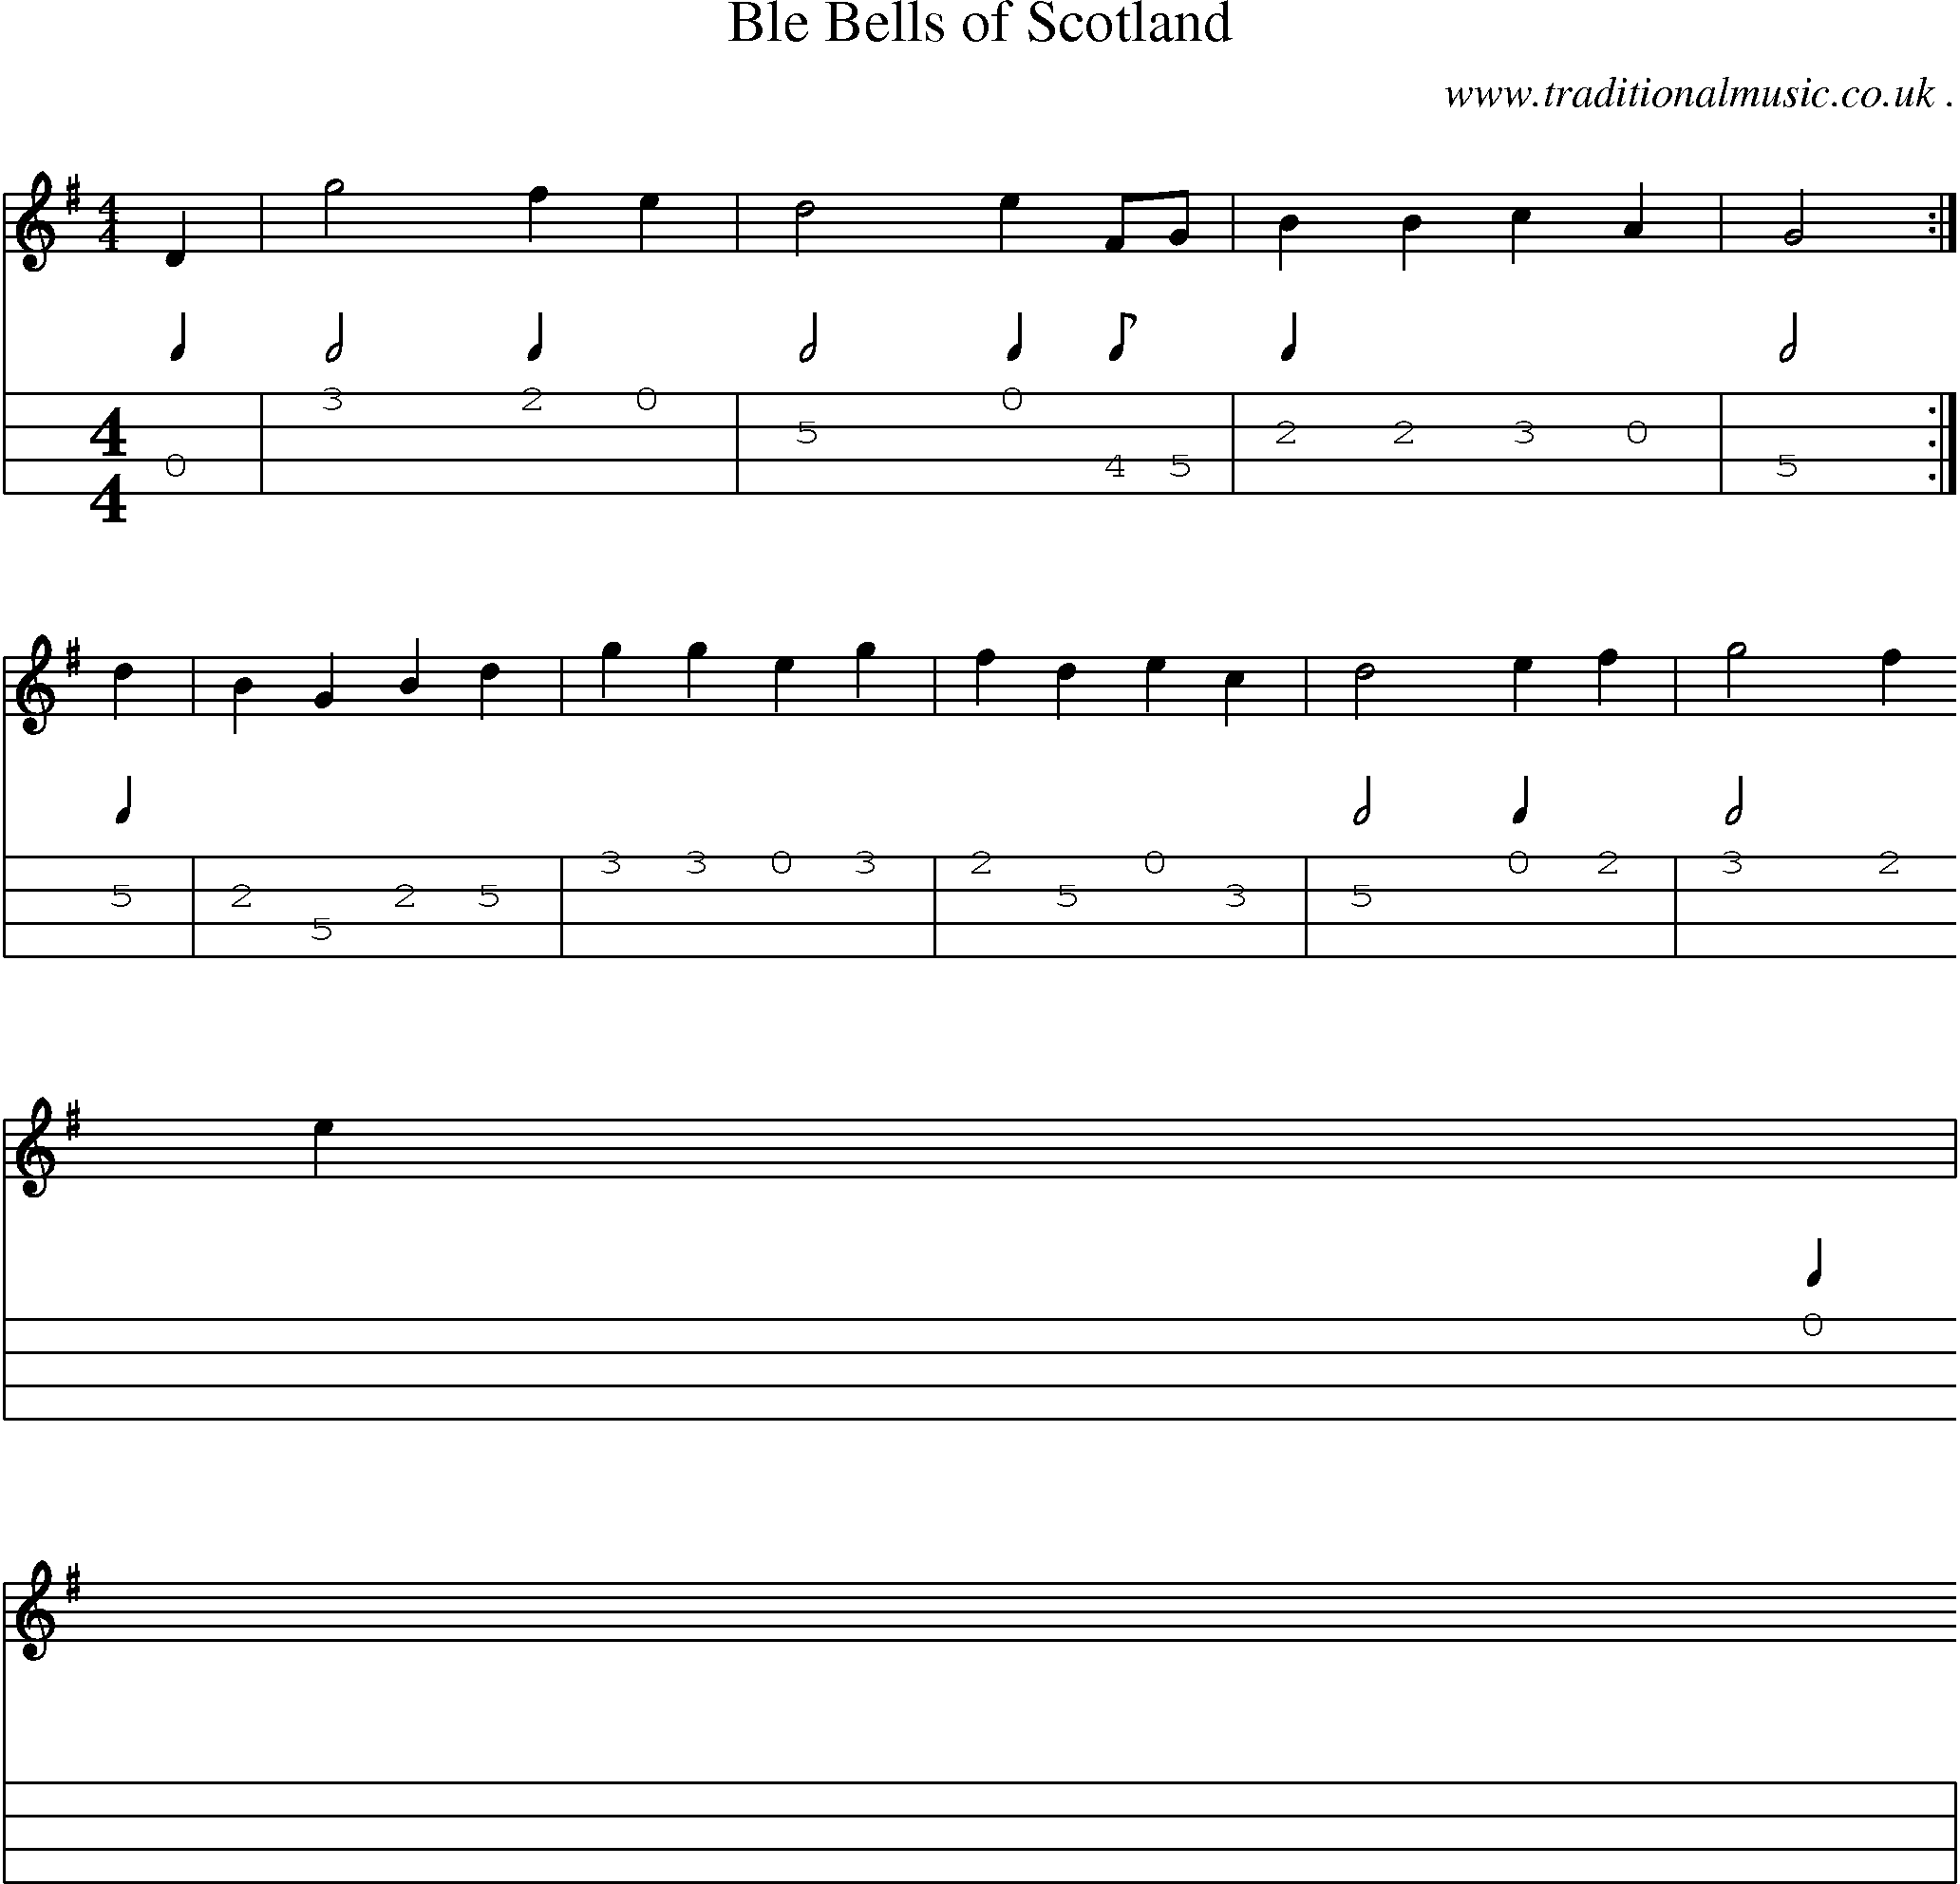 Sheet-Music and Mandolin Tabs for Ble Bells Of Scotland